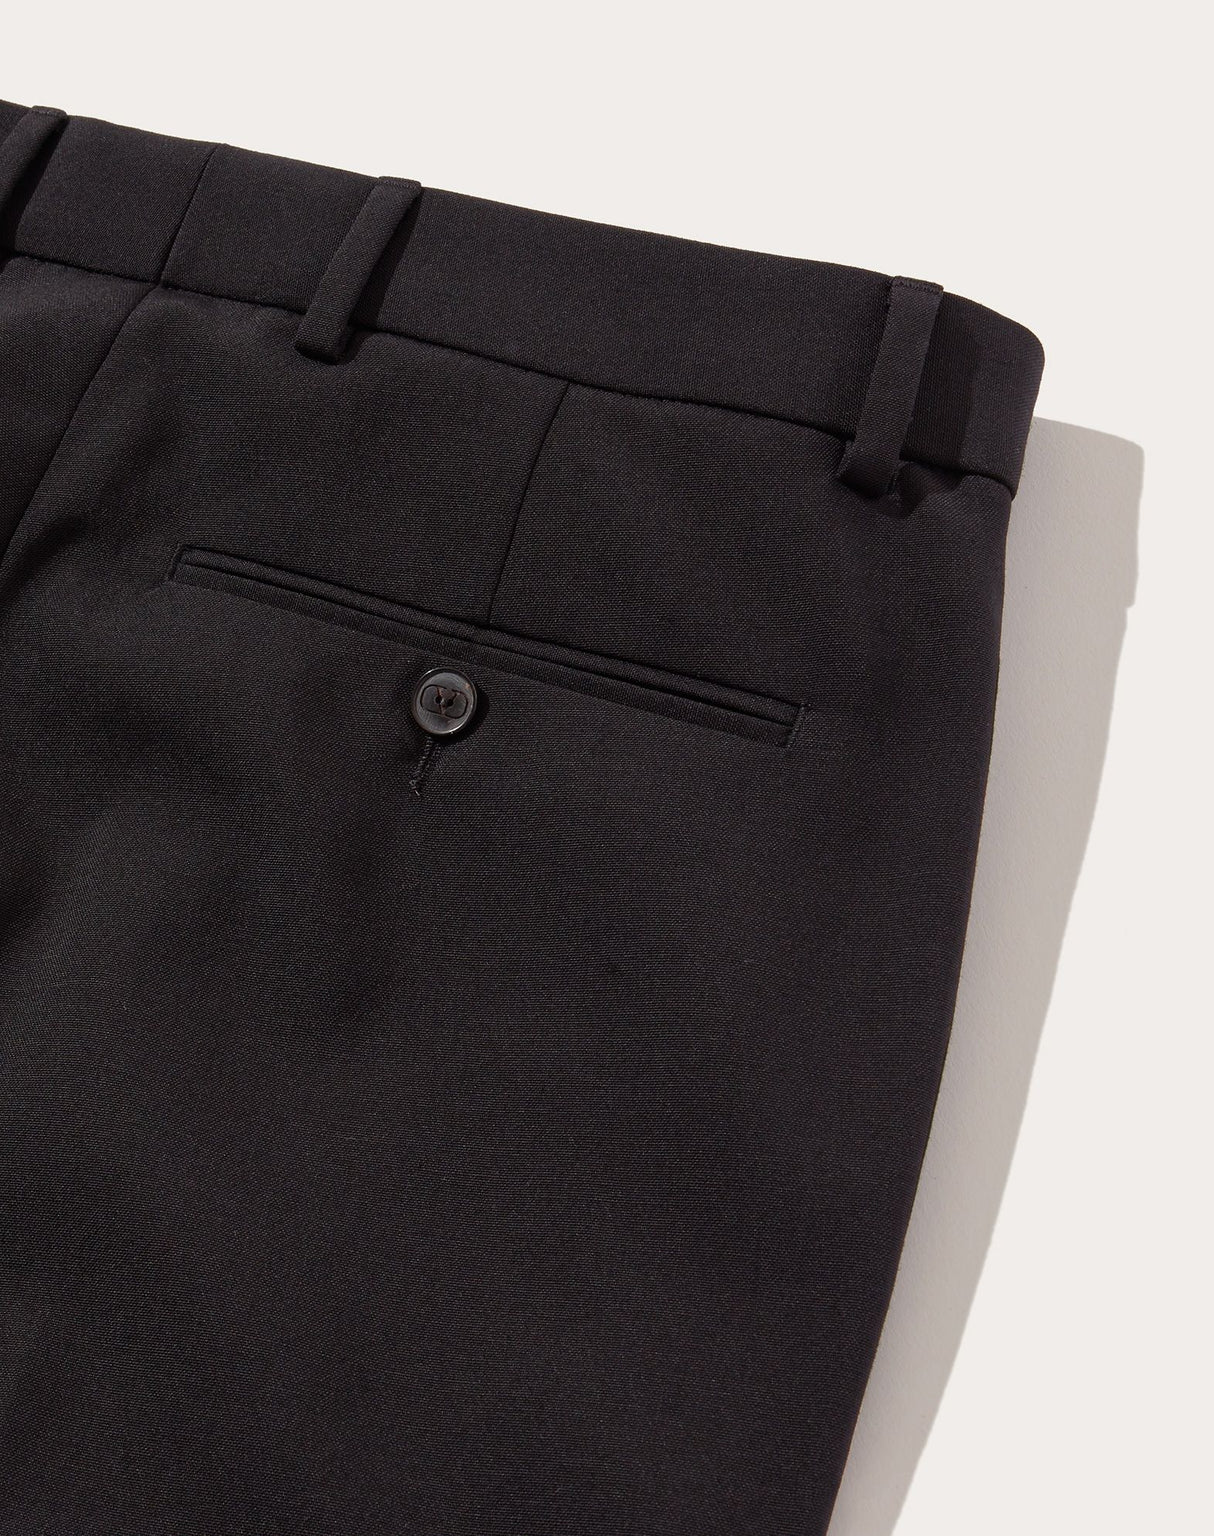 Sophisticated Slim Trousers in Classic Black for Men